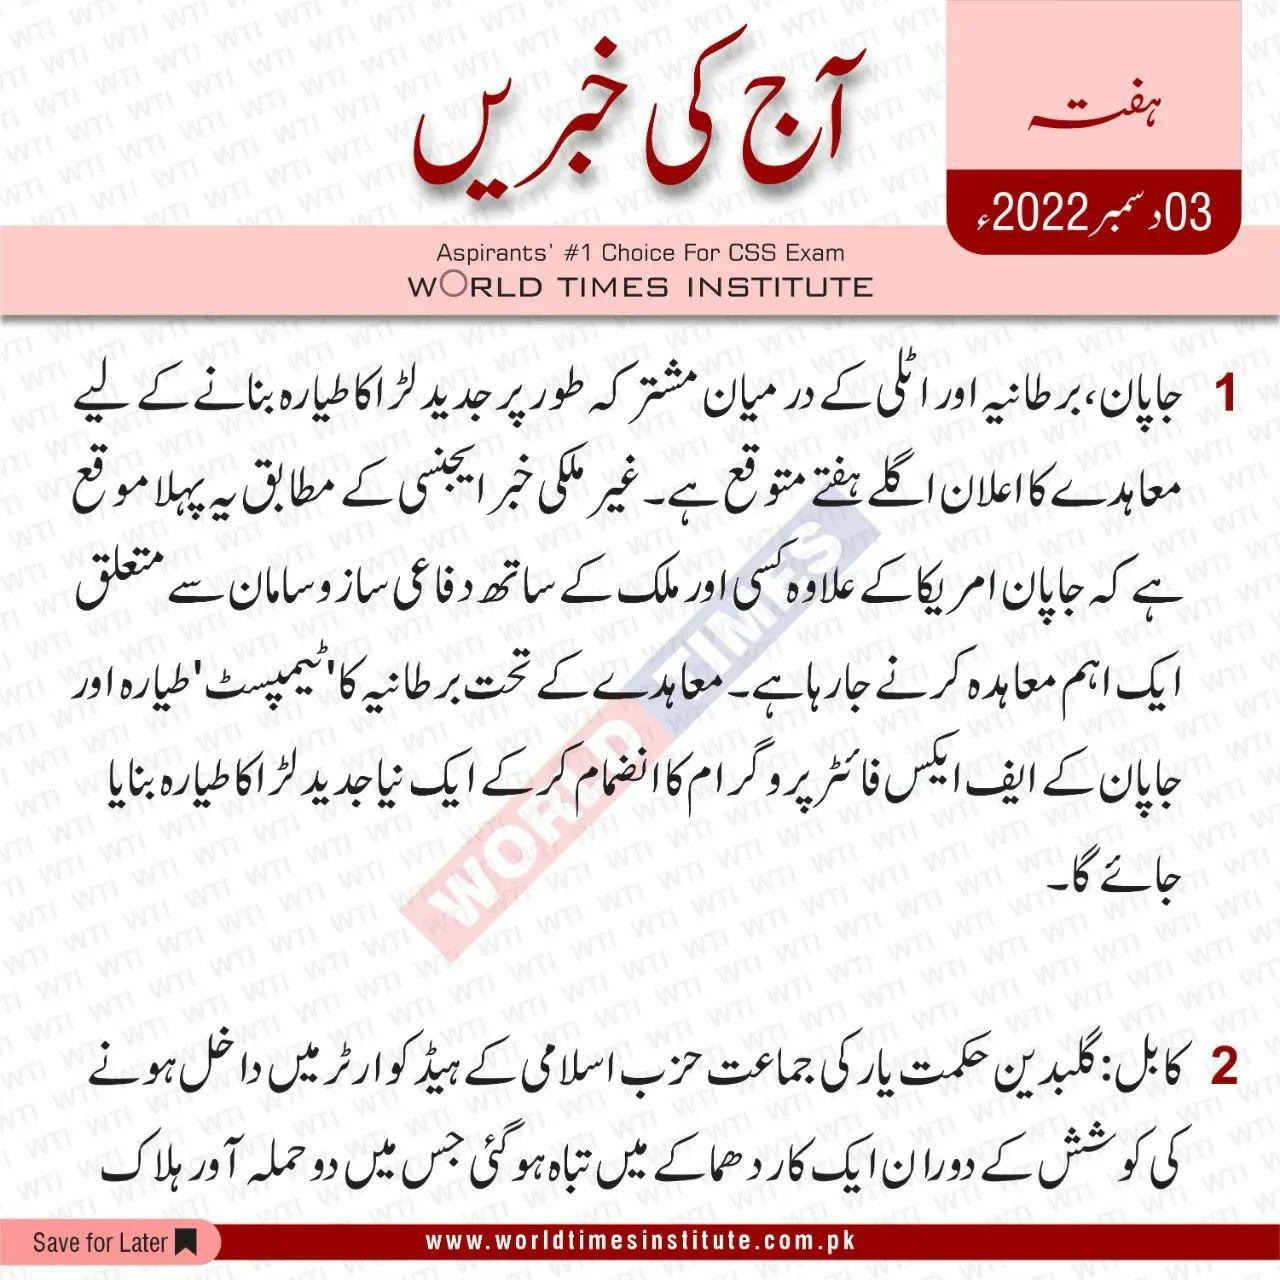 You are currently viewing Urdu News. 03-12-2022